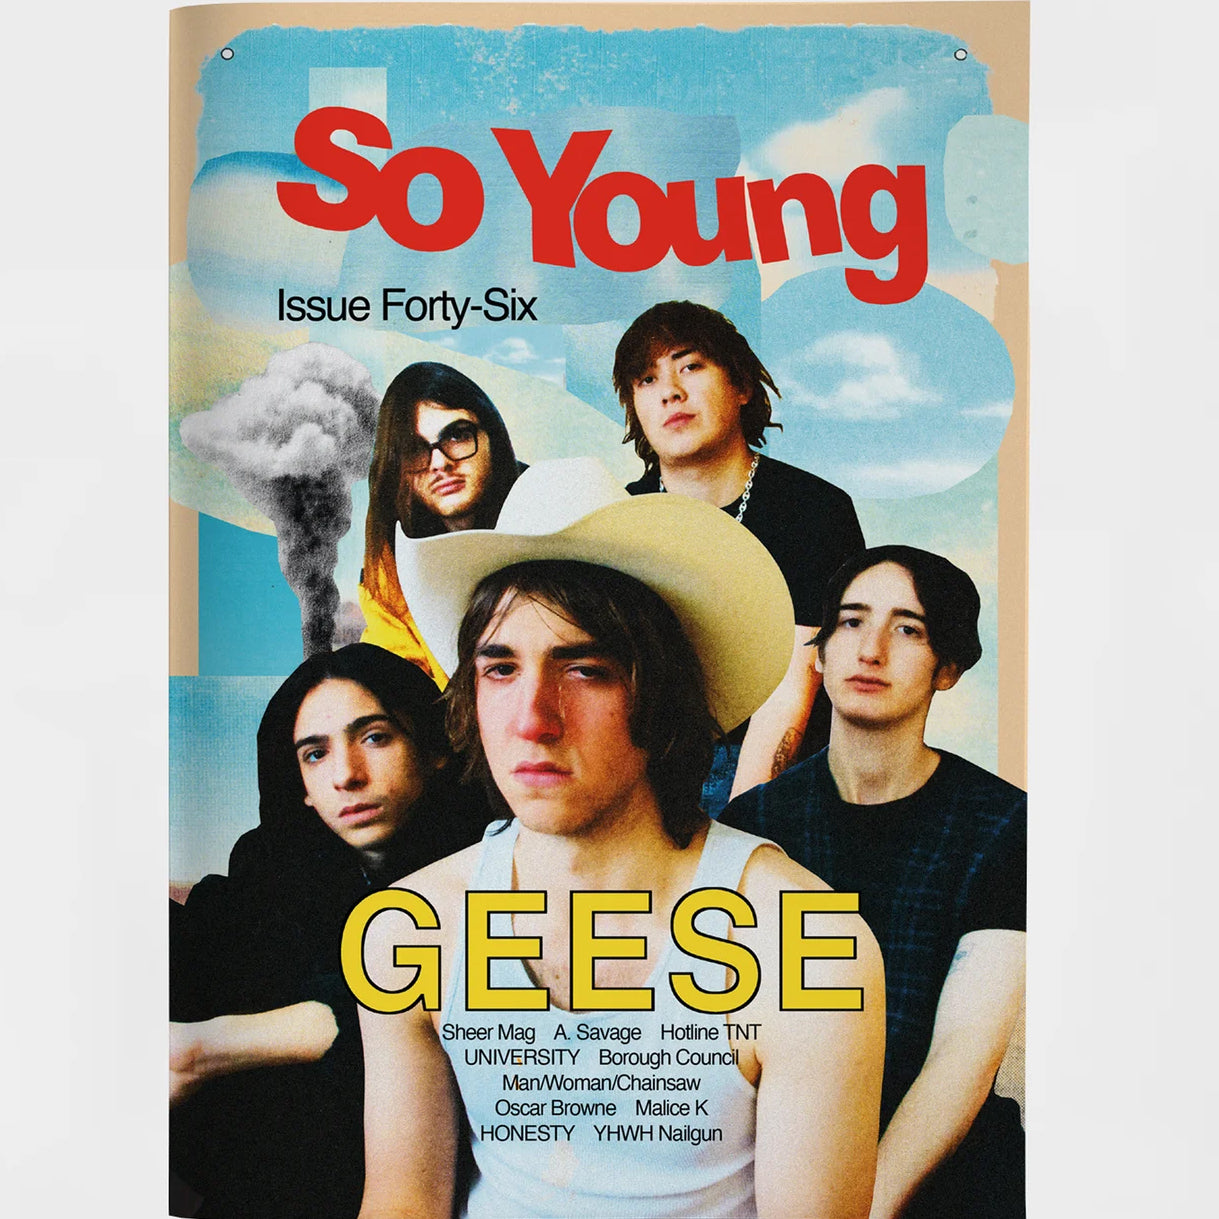 SO YOUNG MAGAZINE 'ISSUE FORTY-SIX'